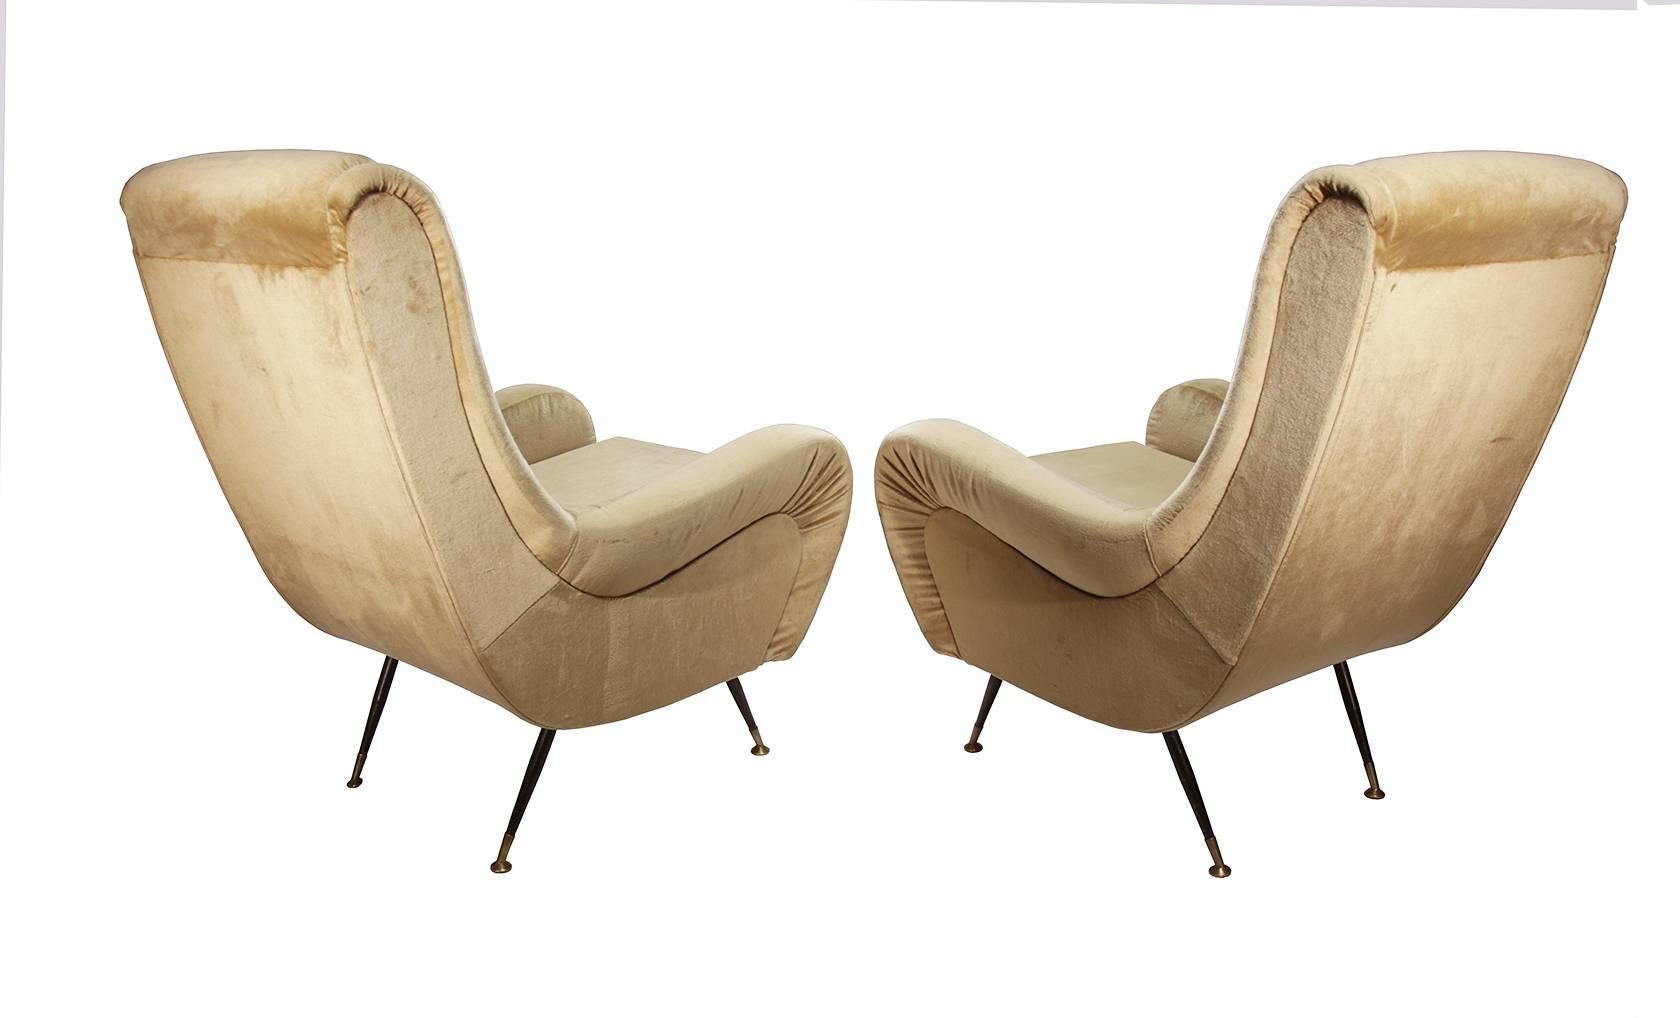 Gigi Radice Italian Midcentury Armchairs In Excellent Condition For Sale In New York, NY